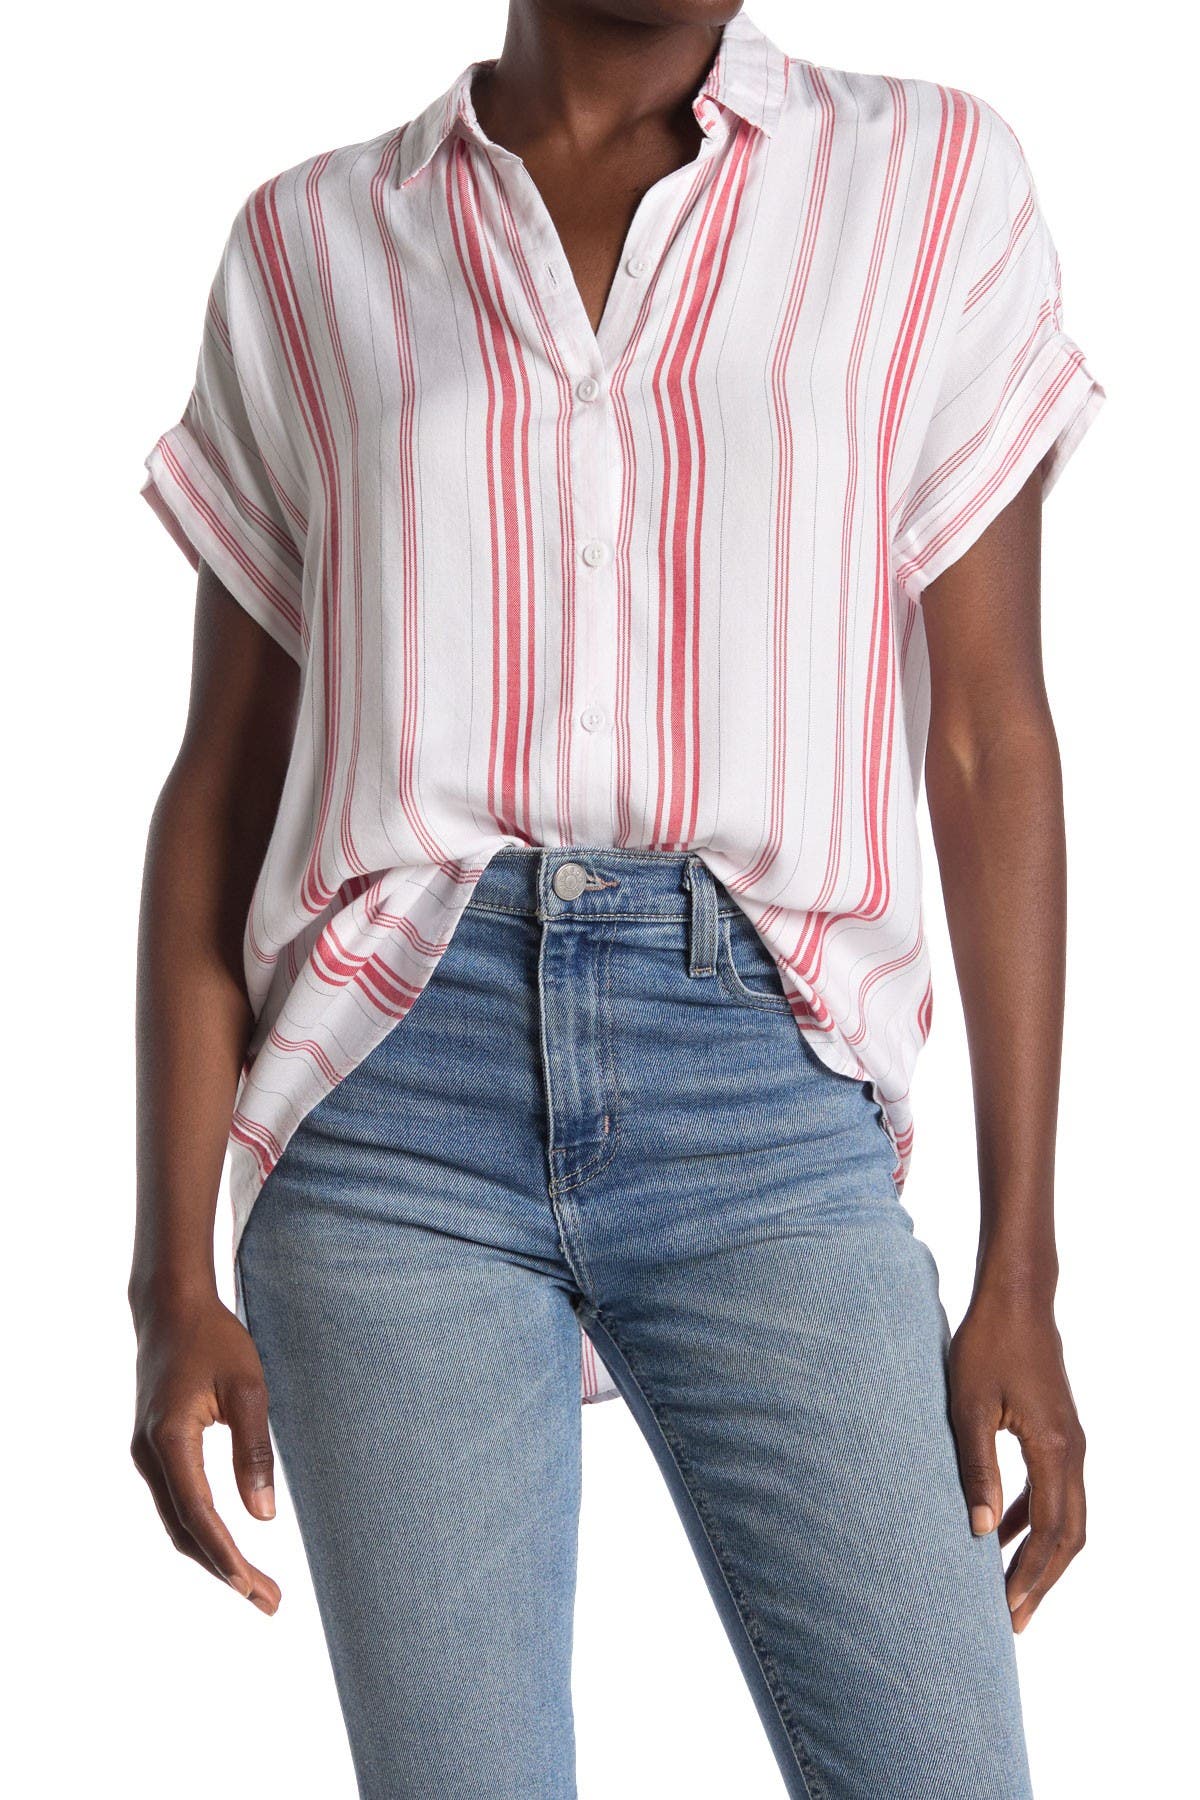 Beachlunchlounge Spencer Striped Short Sleeve Camp Shirt In Open White17